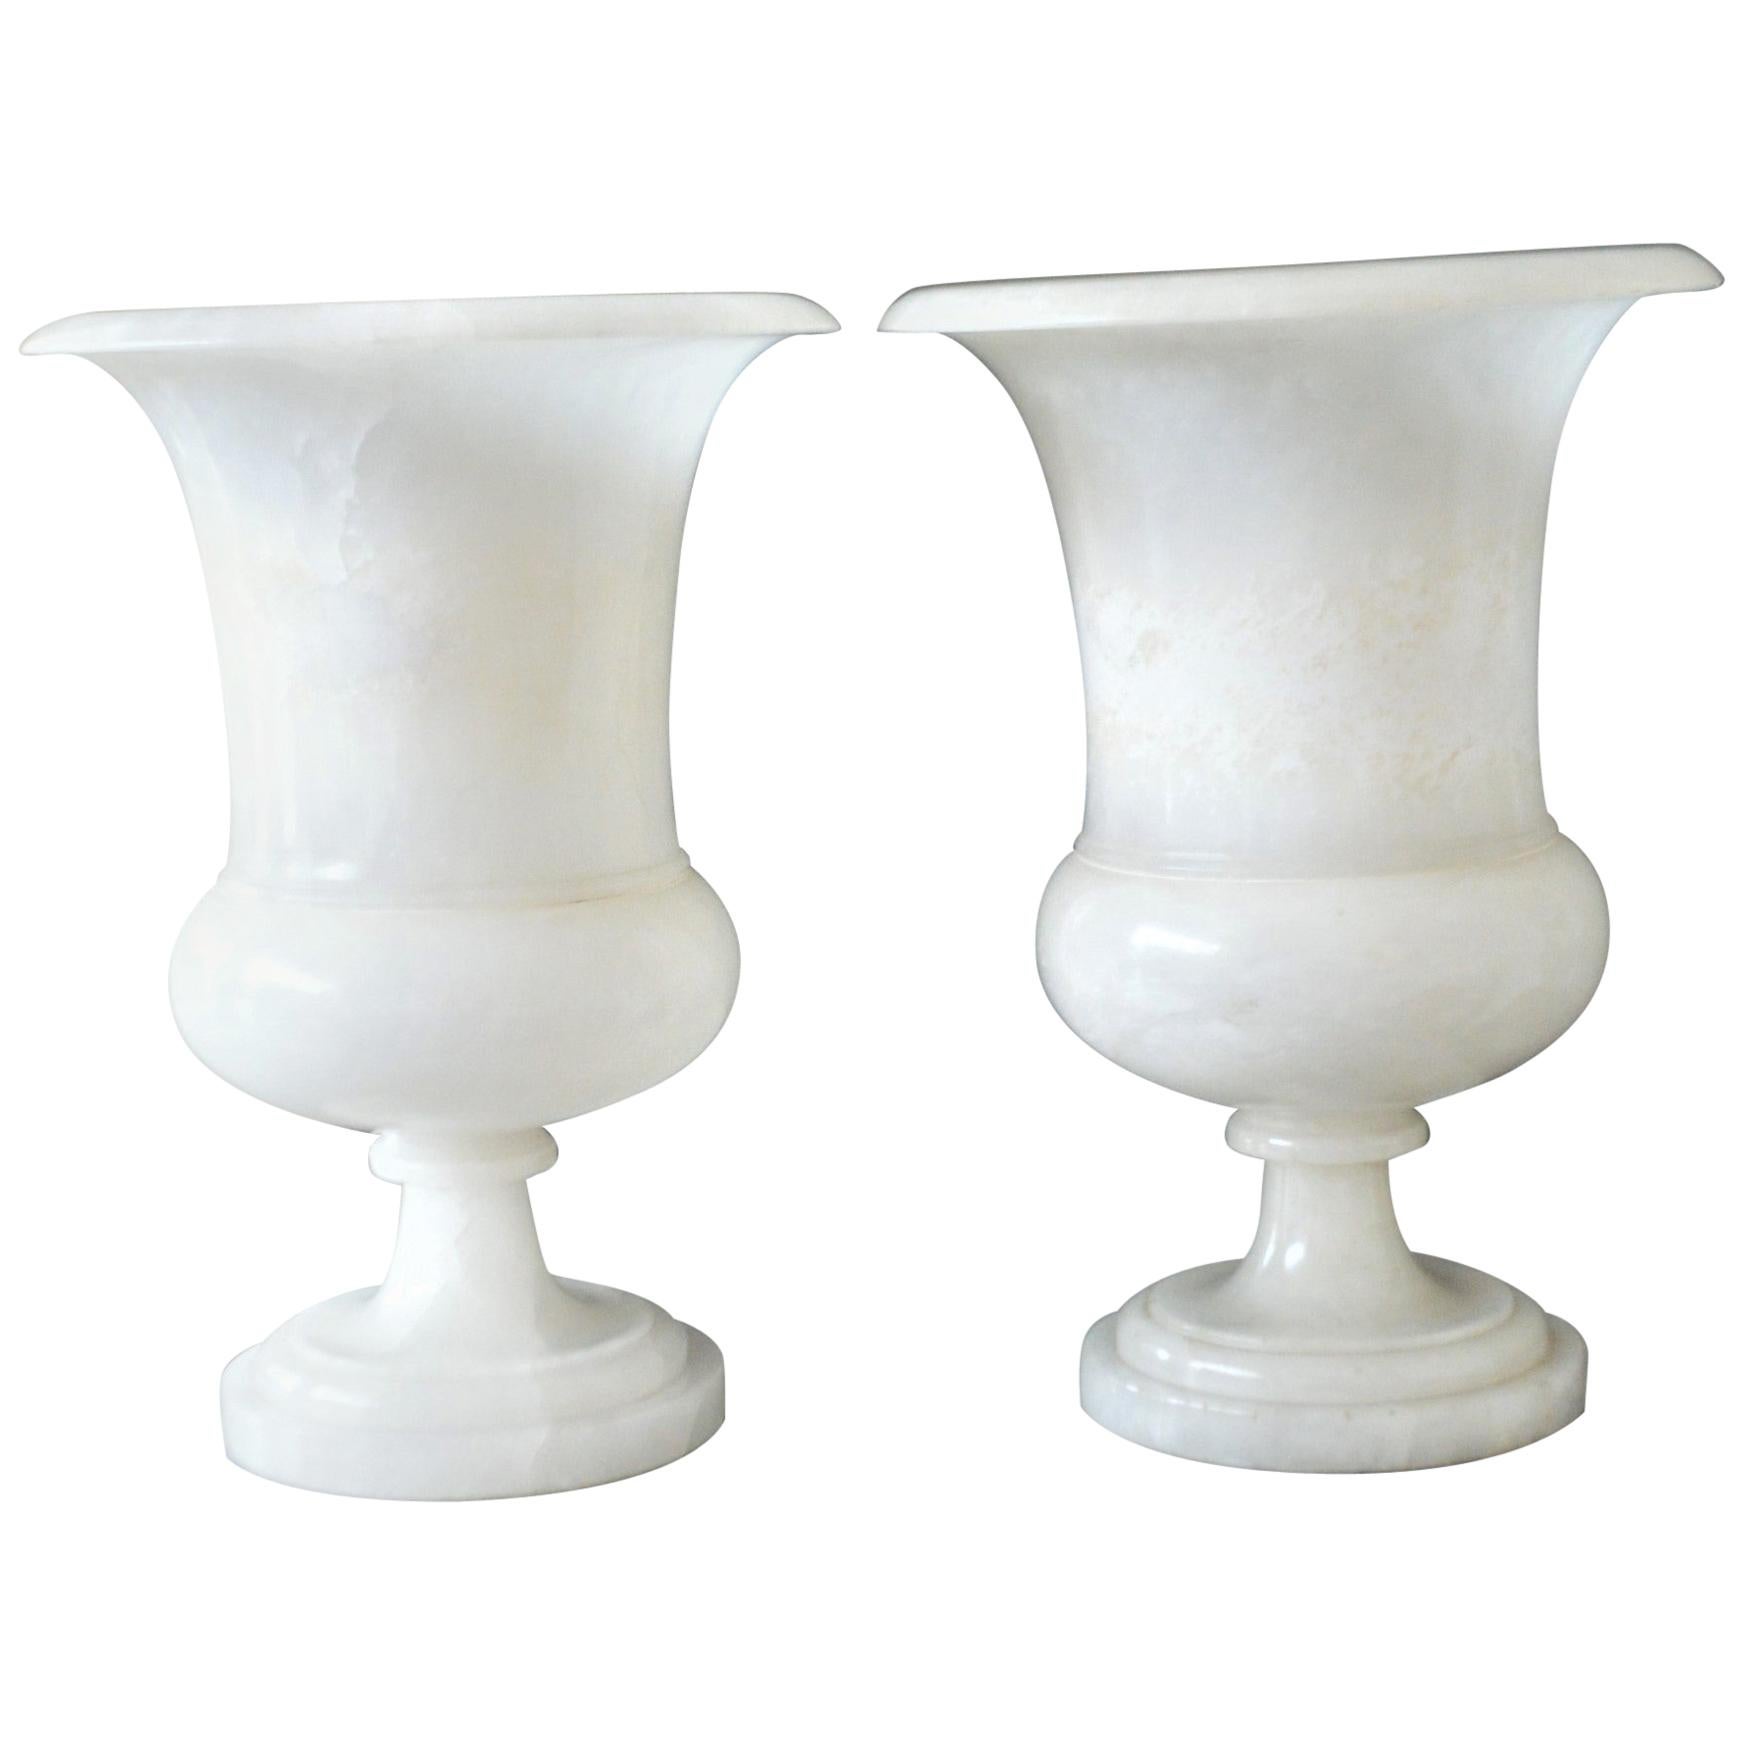 Pair of Art Deco Period White Marble Urns Converted to Table Lamps